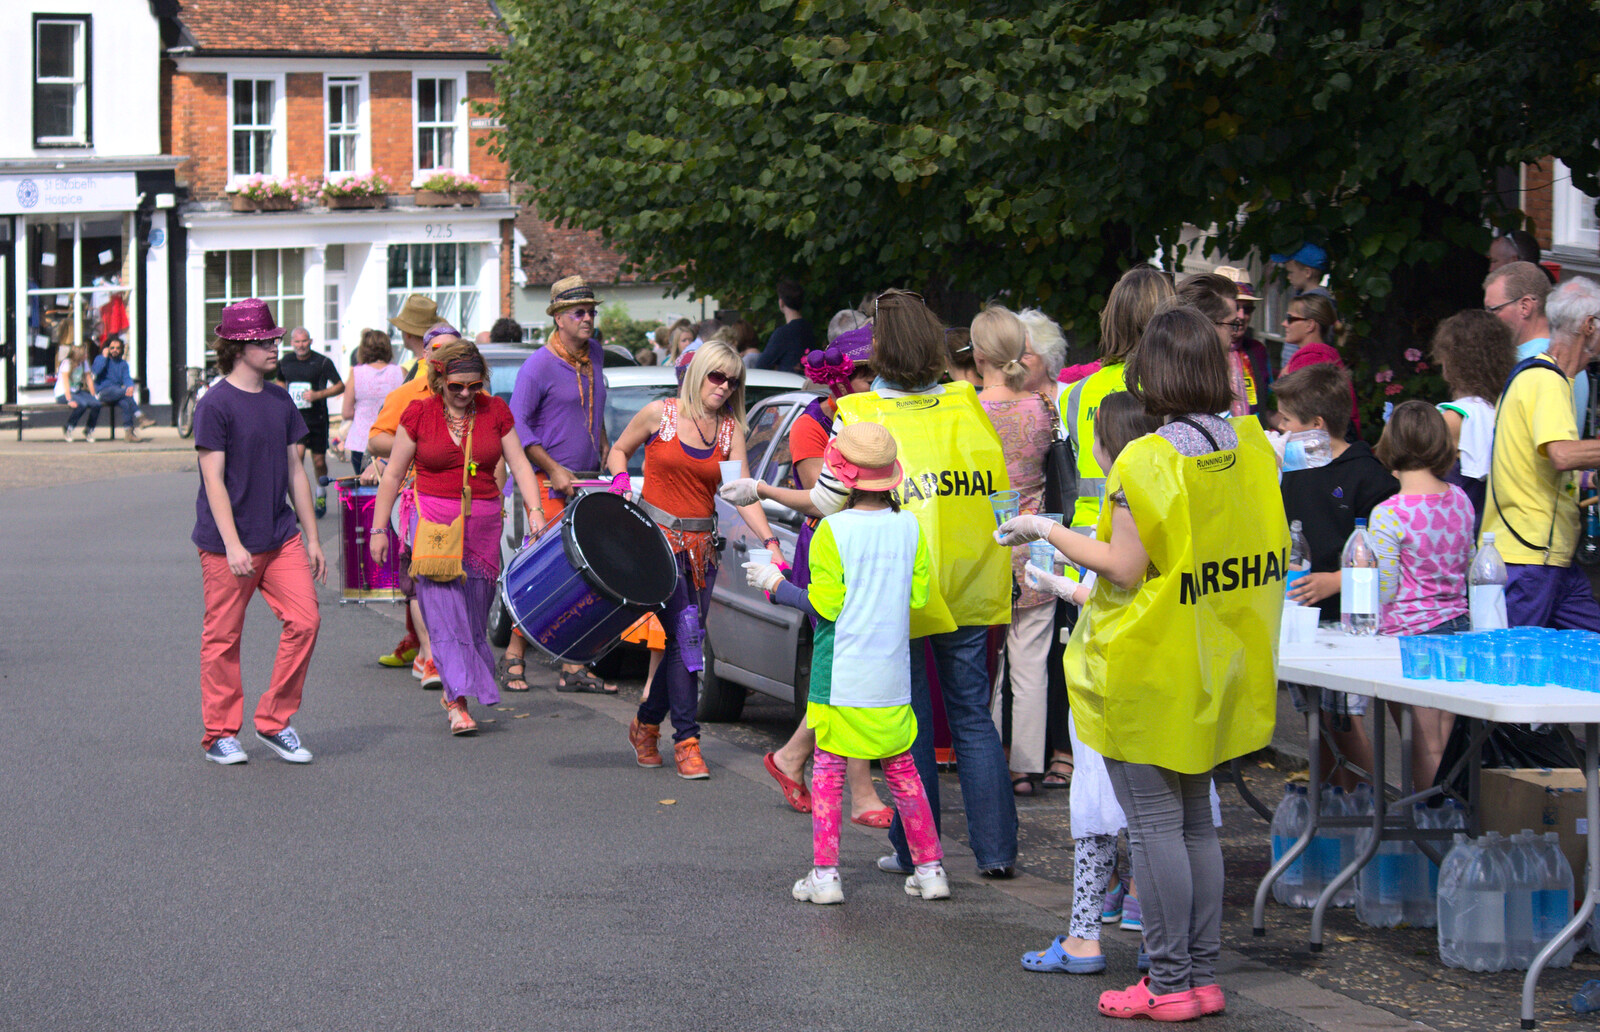 The Samba players come in for some water from The Framlingham 10k Run, Suffolk - 31st August 2014